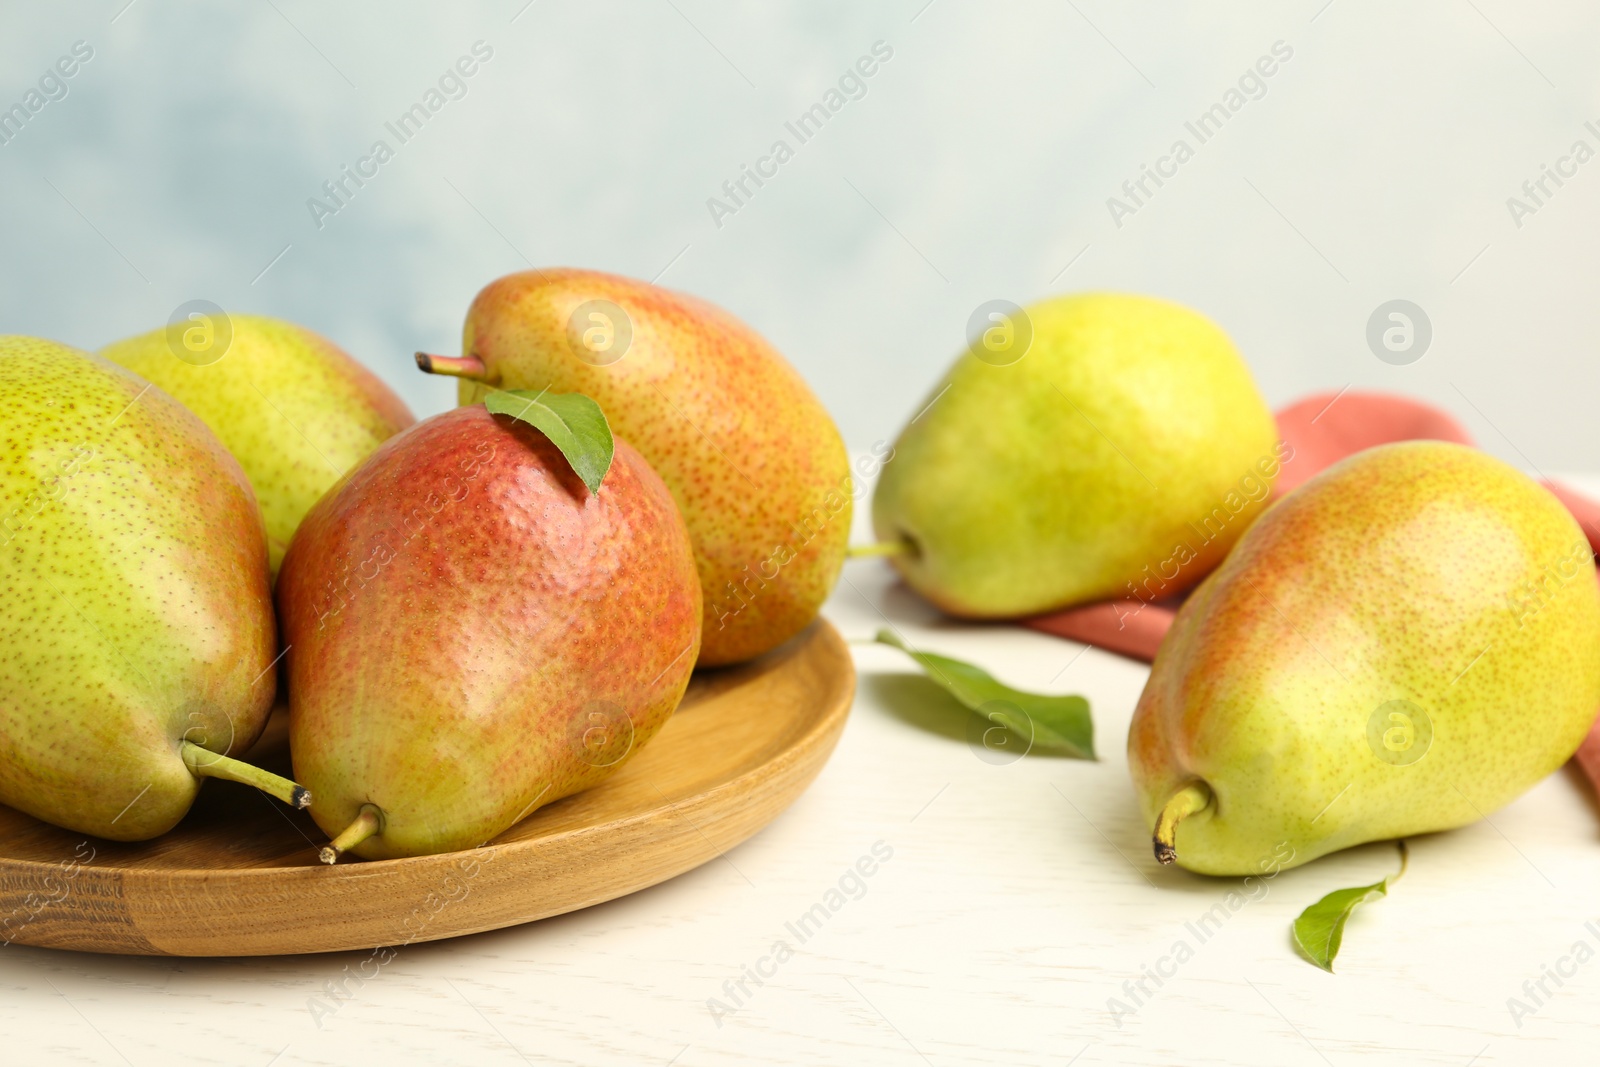 Photo of Ripe juicy pears on white wooden table against light background